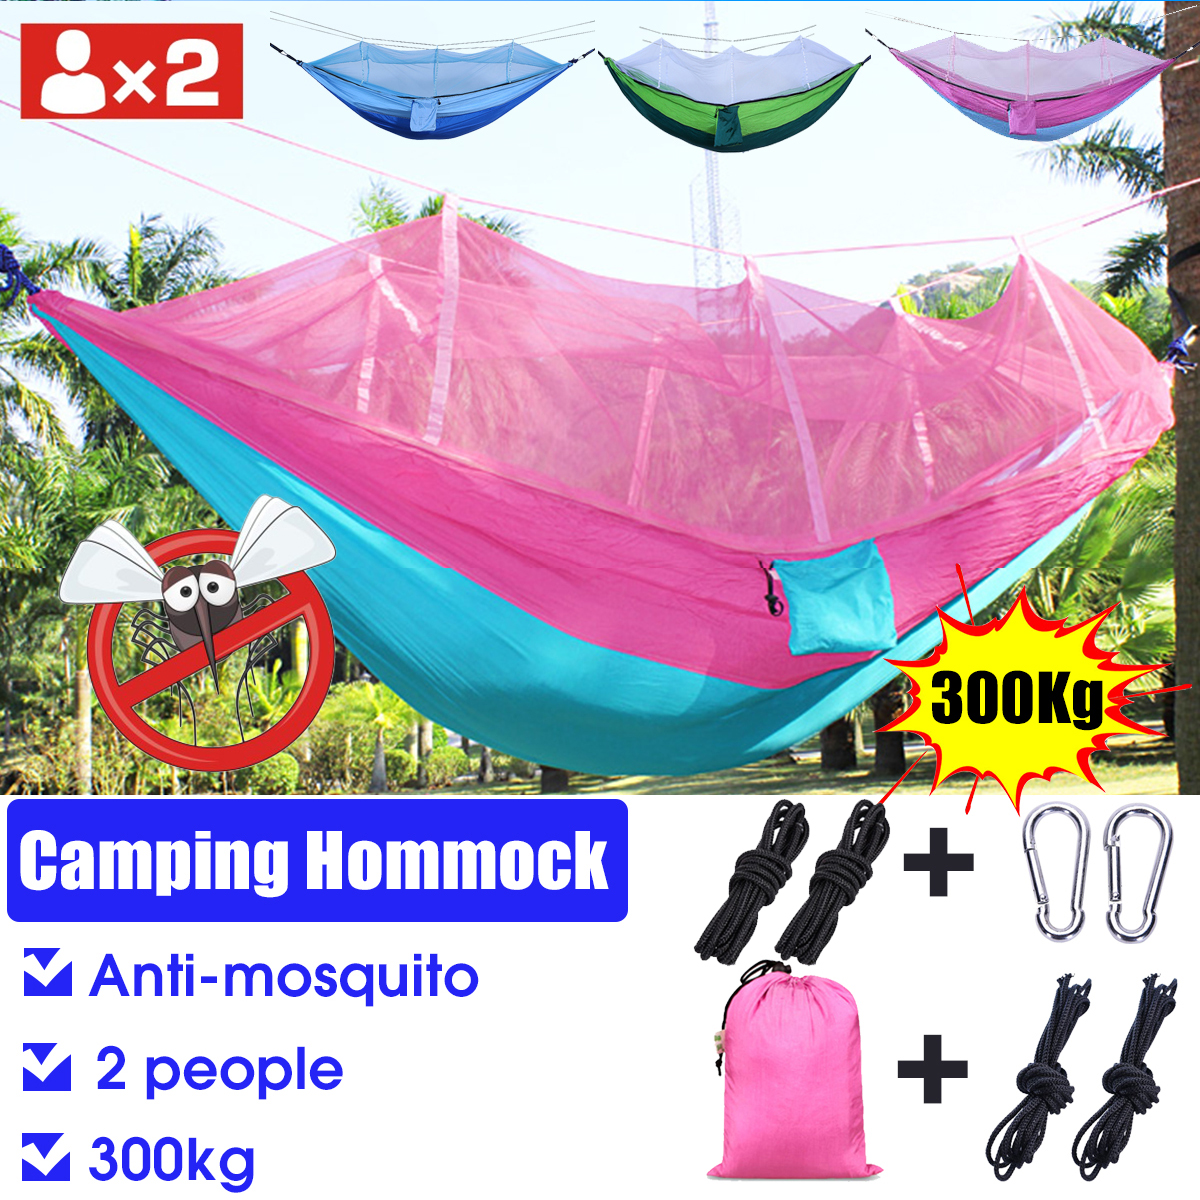 IPReereg-260140CM-With-Mosquito-Net-Portable-Travel-Hammock-Comfortable-Hommock-Camping-Bed-Fits-2-P-1726267-2